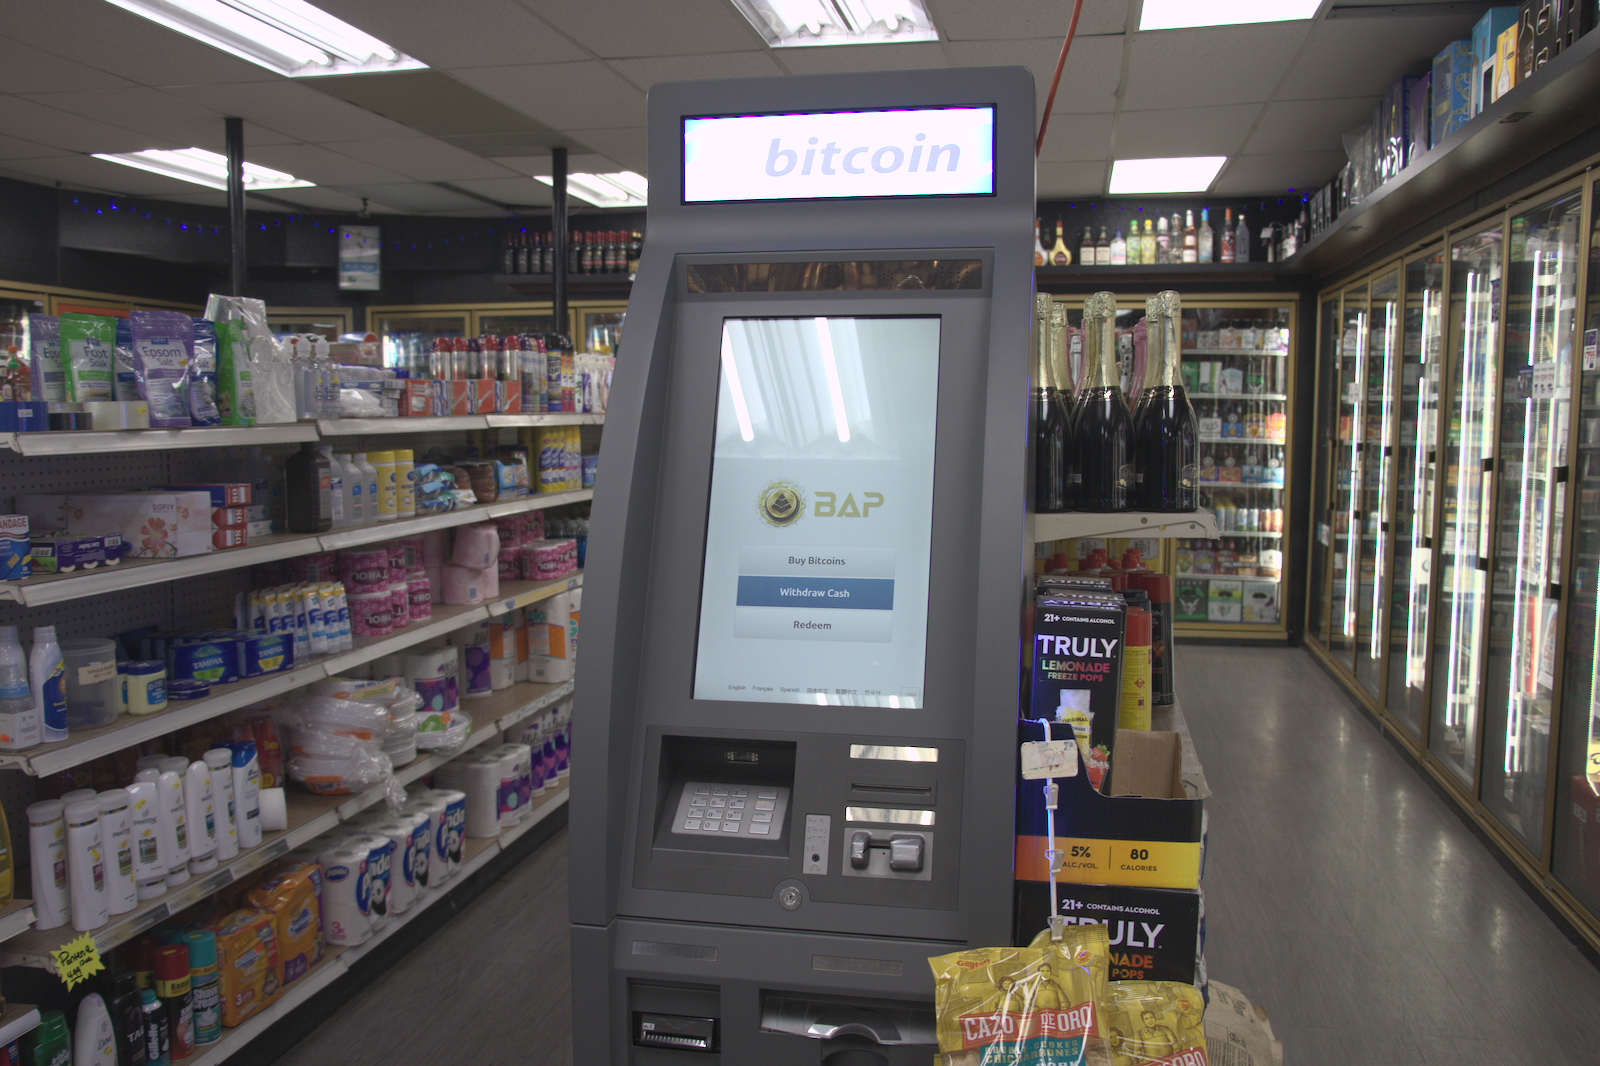 An ATM that accepts Bitcoin stands inside a liquor store by toiletries and drinks in a fridge.